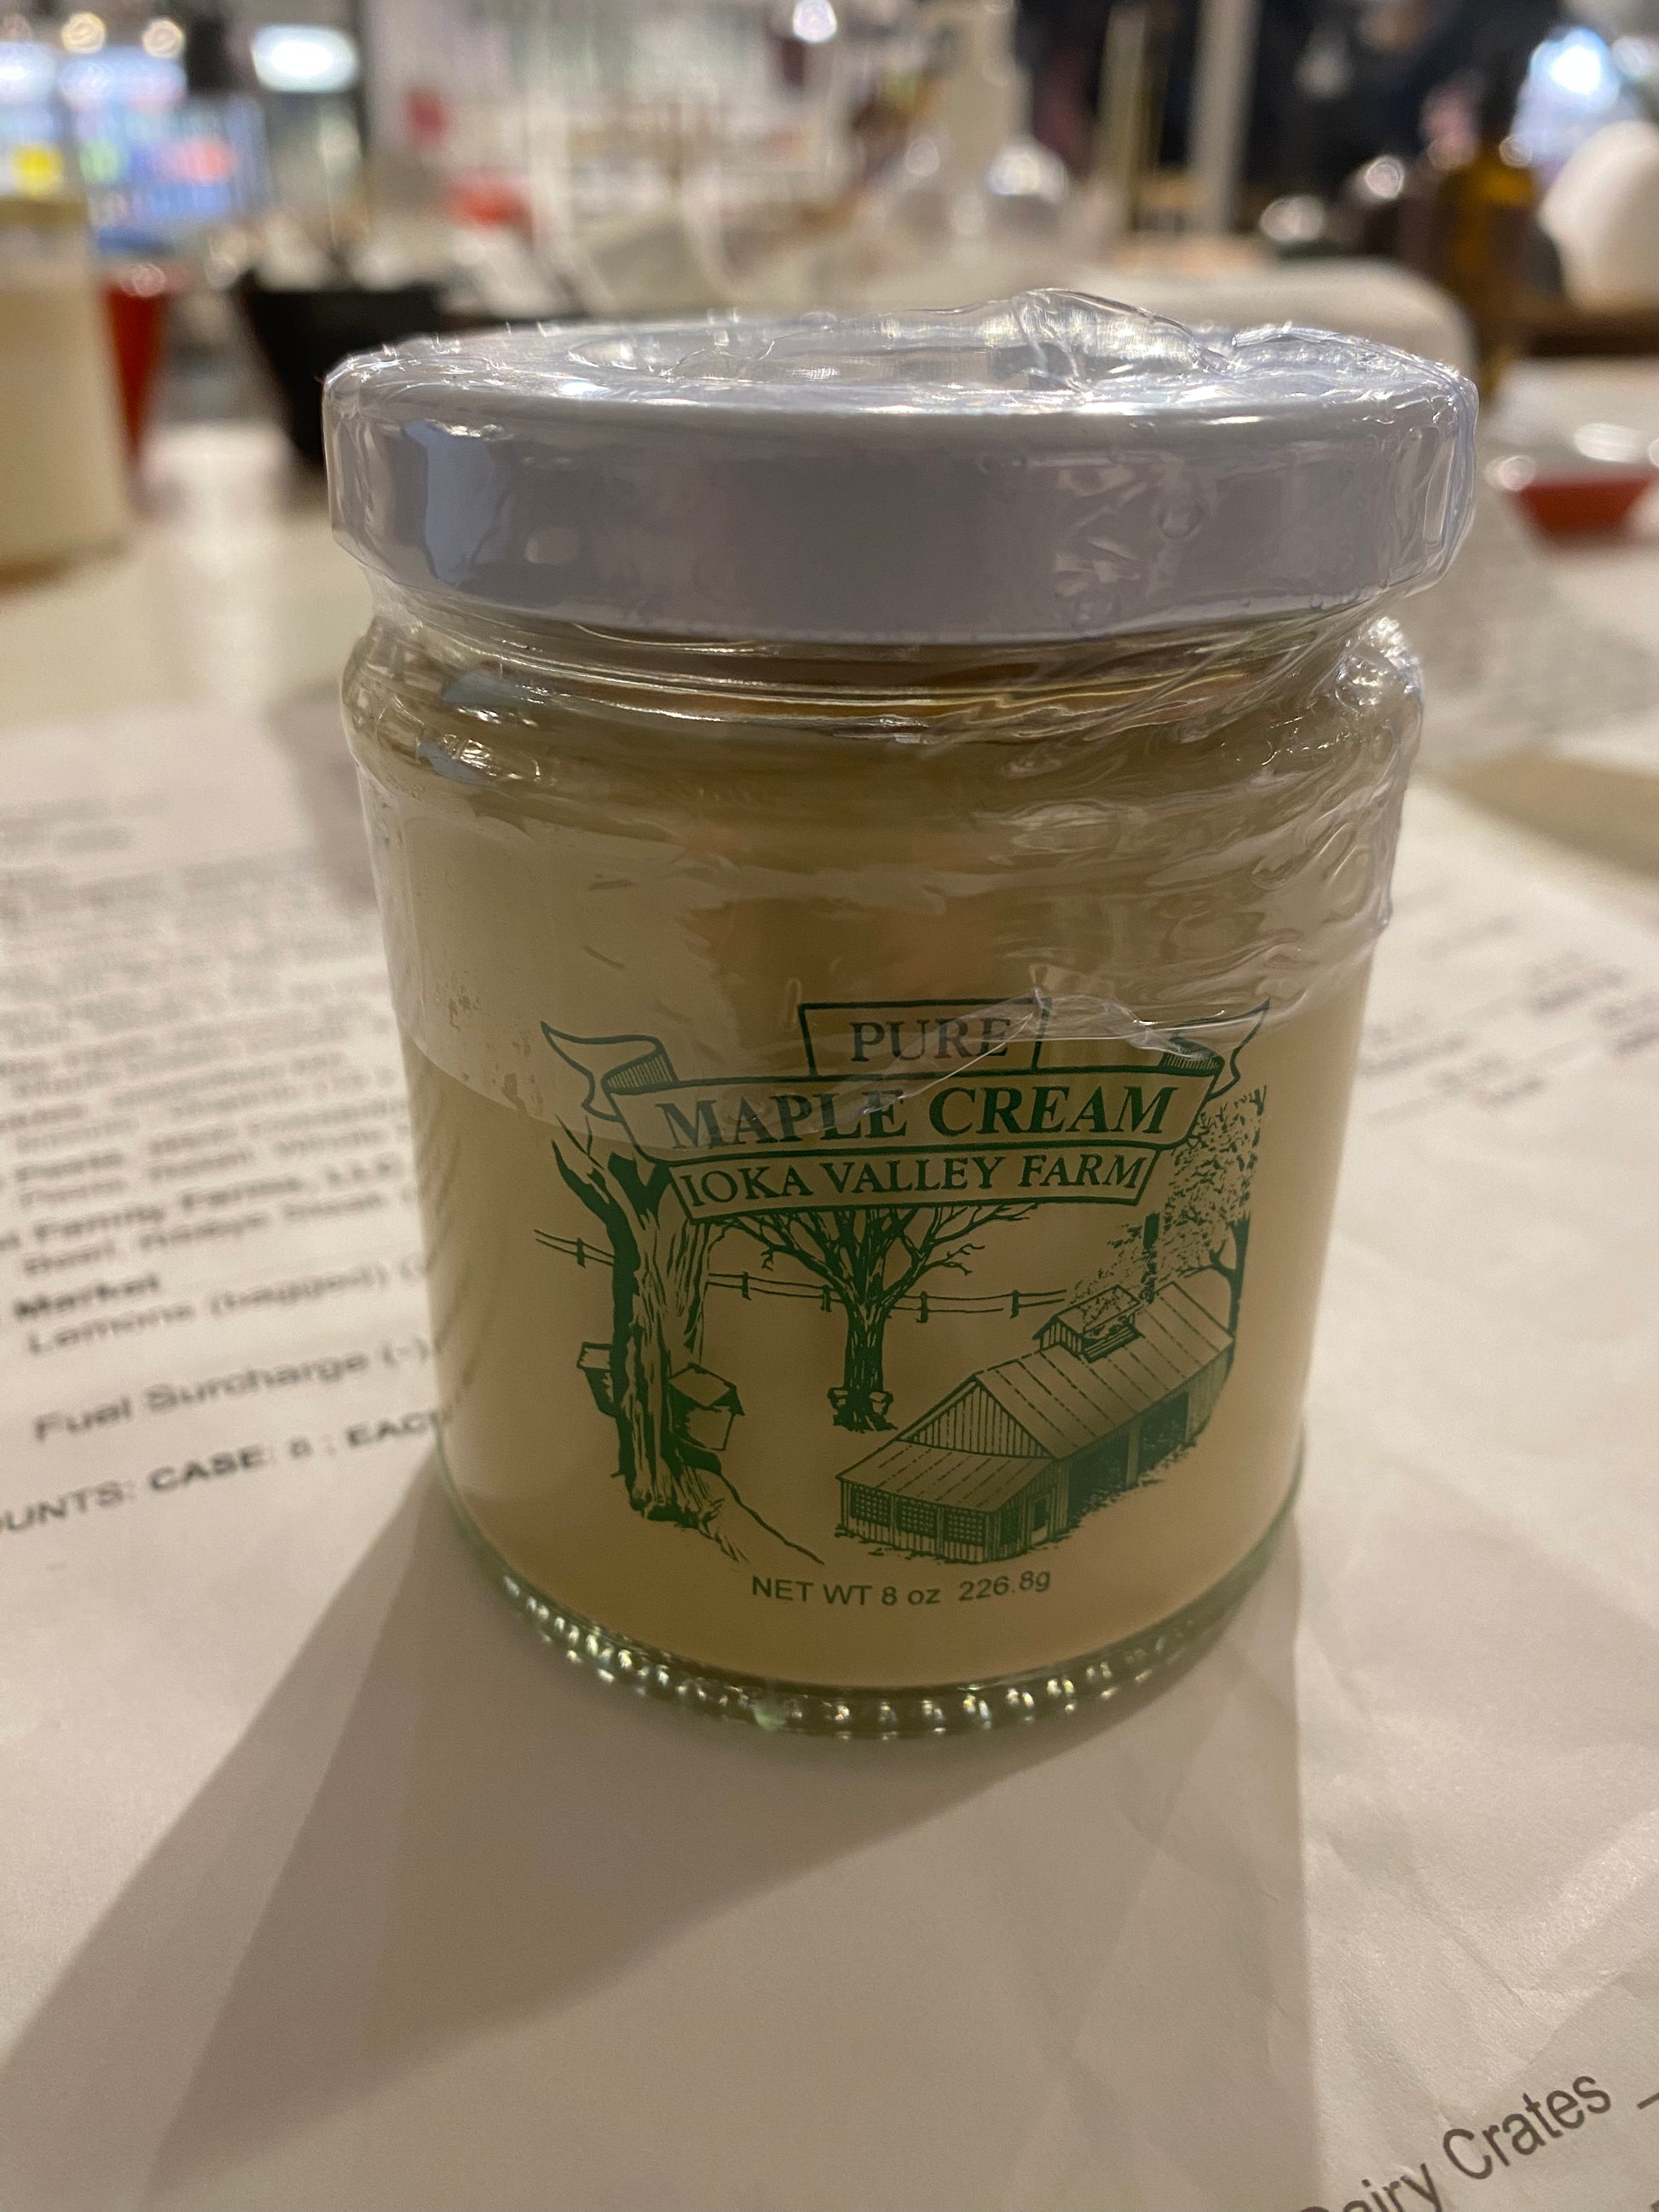 A jar of Westerlind Maple Cream from Oka Valley Farm, sealed with a white cap, displayed on a table with blurred background.